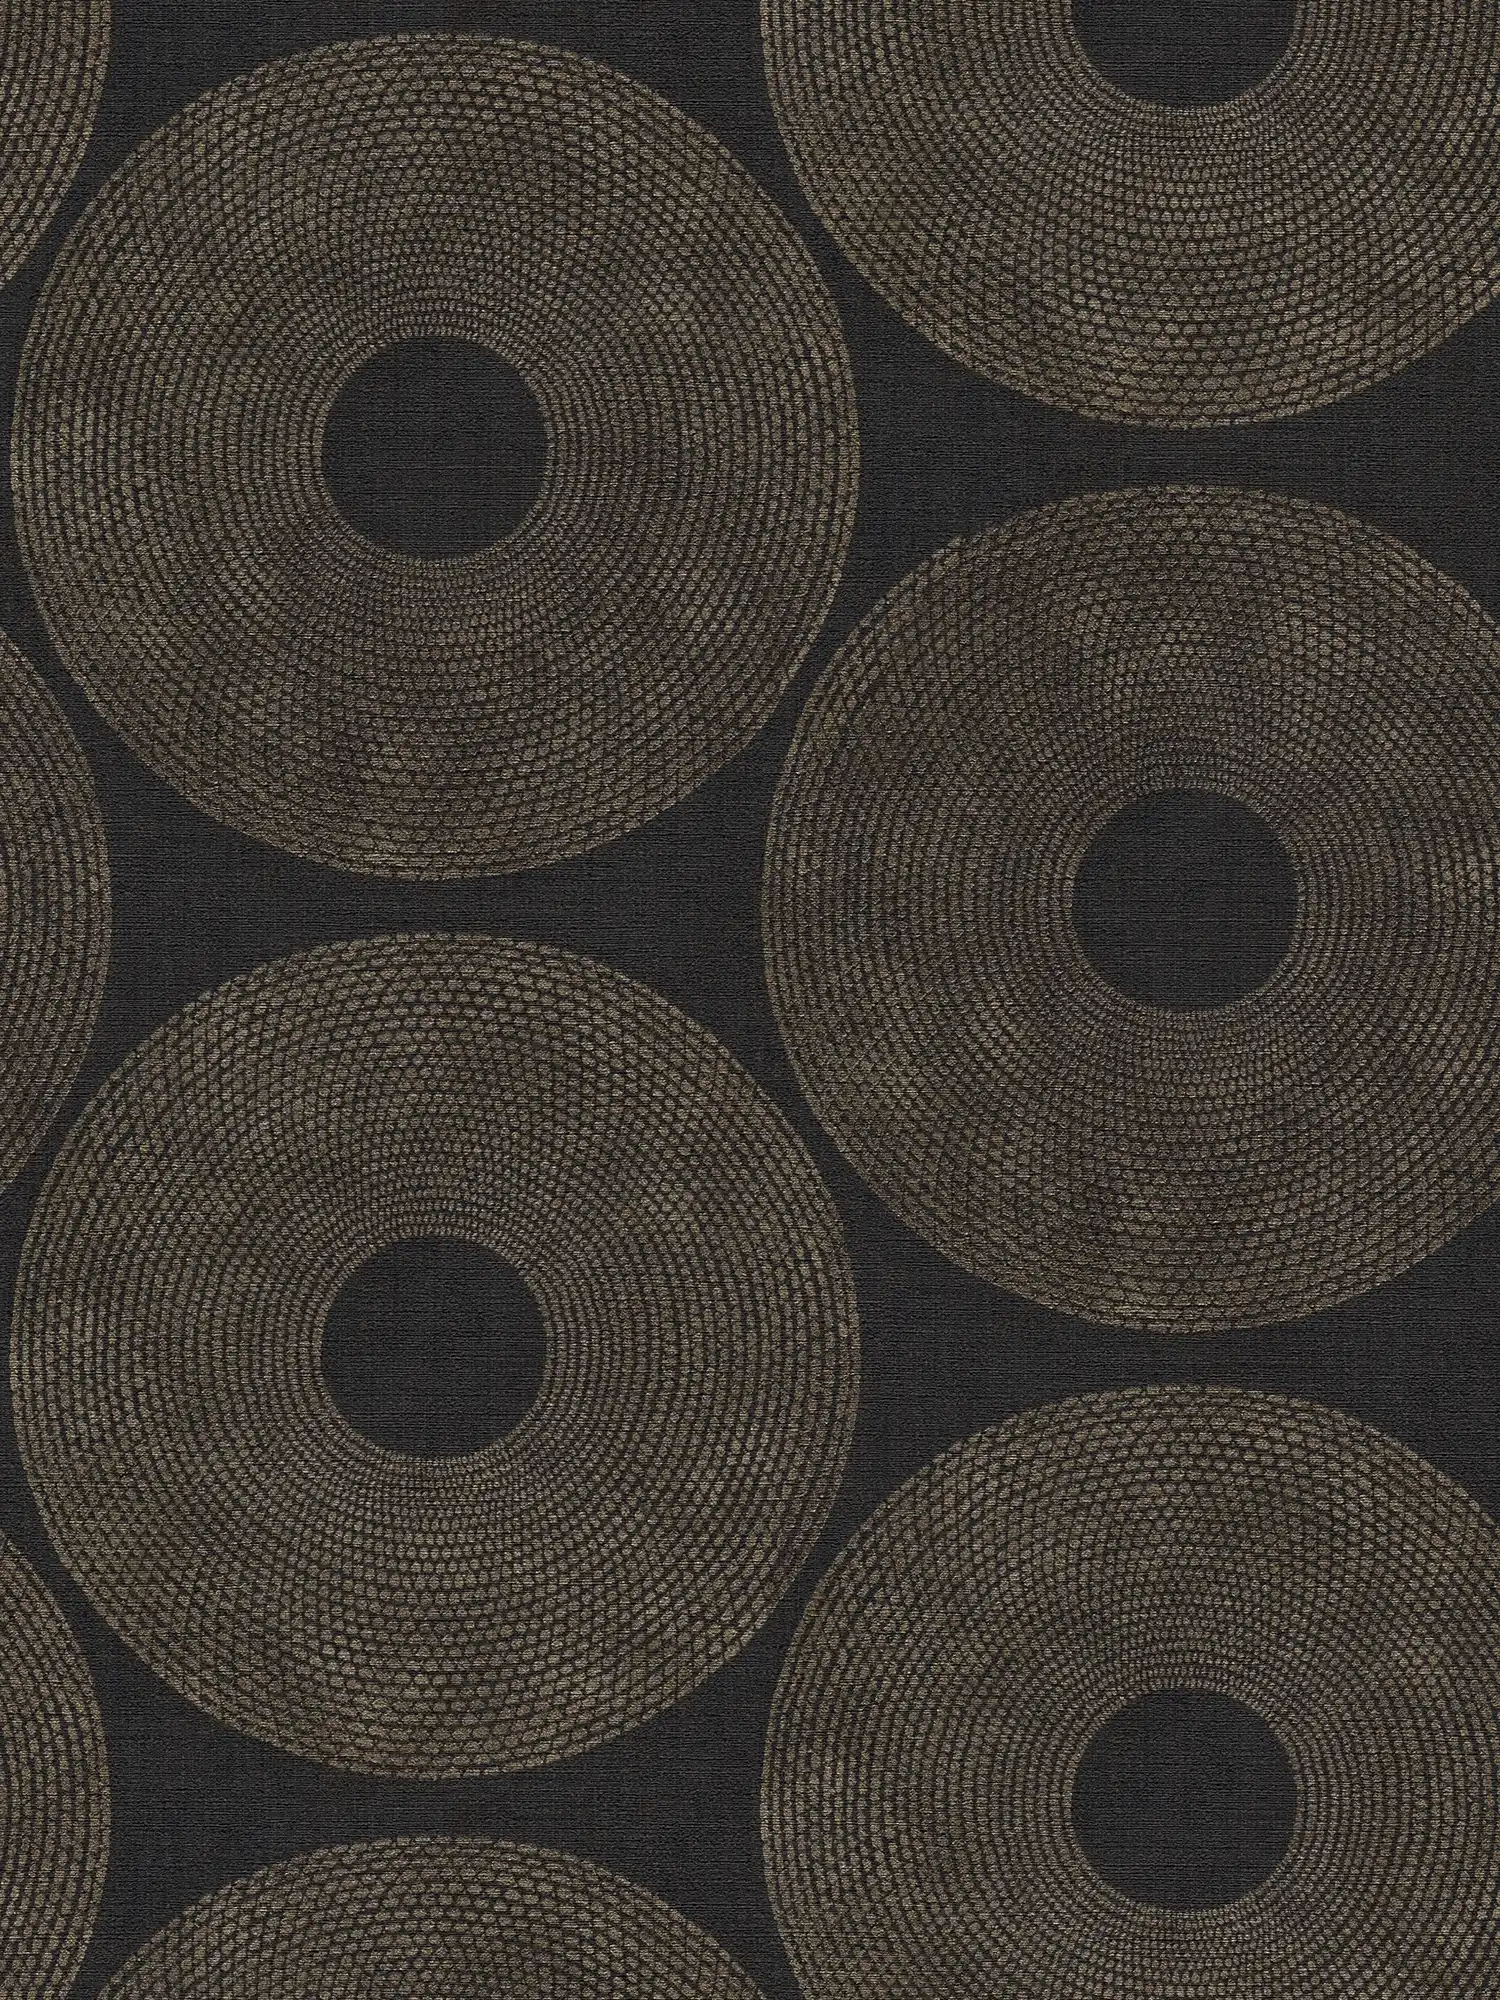         Ethno wallpaper circles with structure design - grey, brown
    